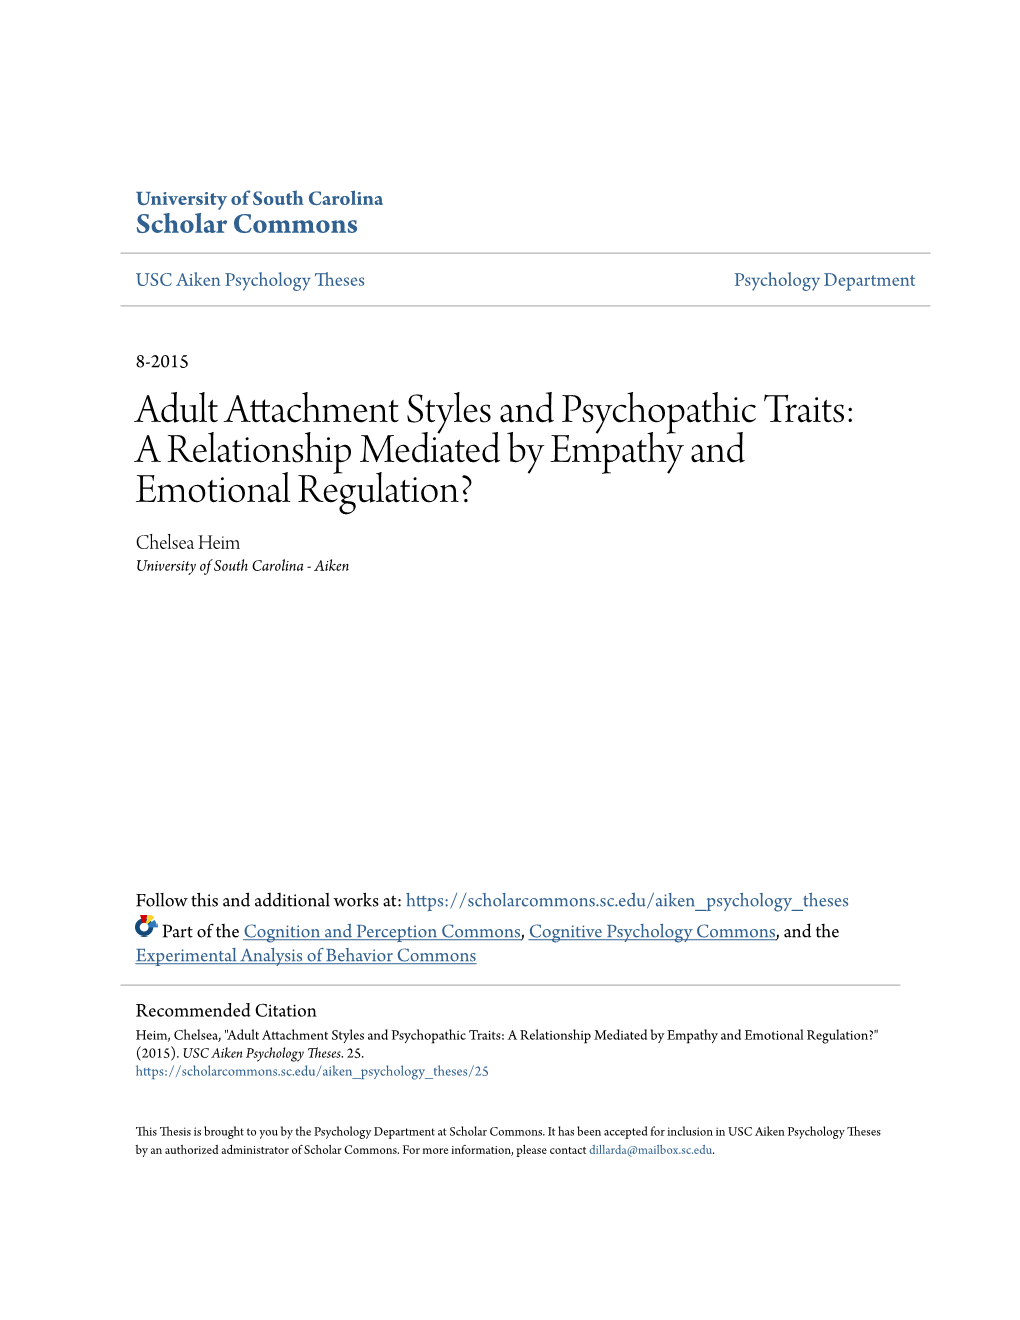 Adult Attachment Styles and Psychopathic Traits: a Relationship Mediated by Empathy and Emotional Regulation? Chelsea Heim University of South Carolina - Aiken